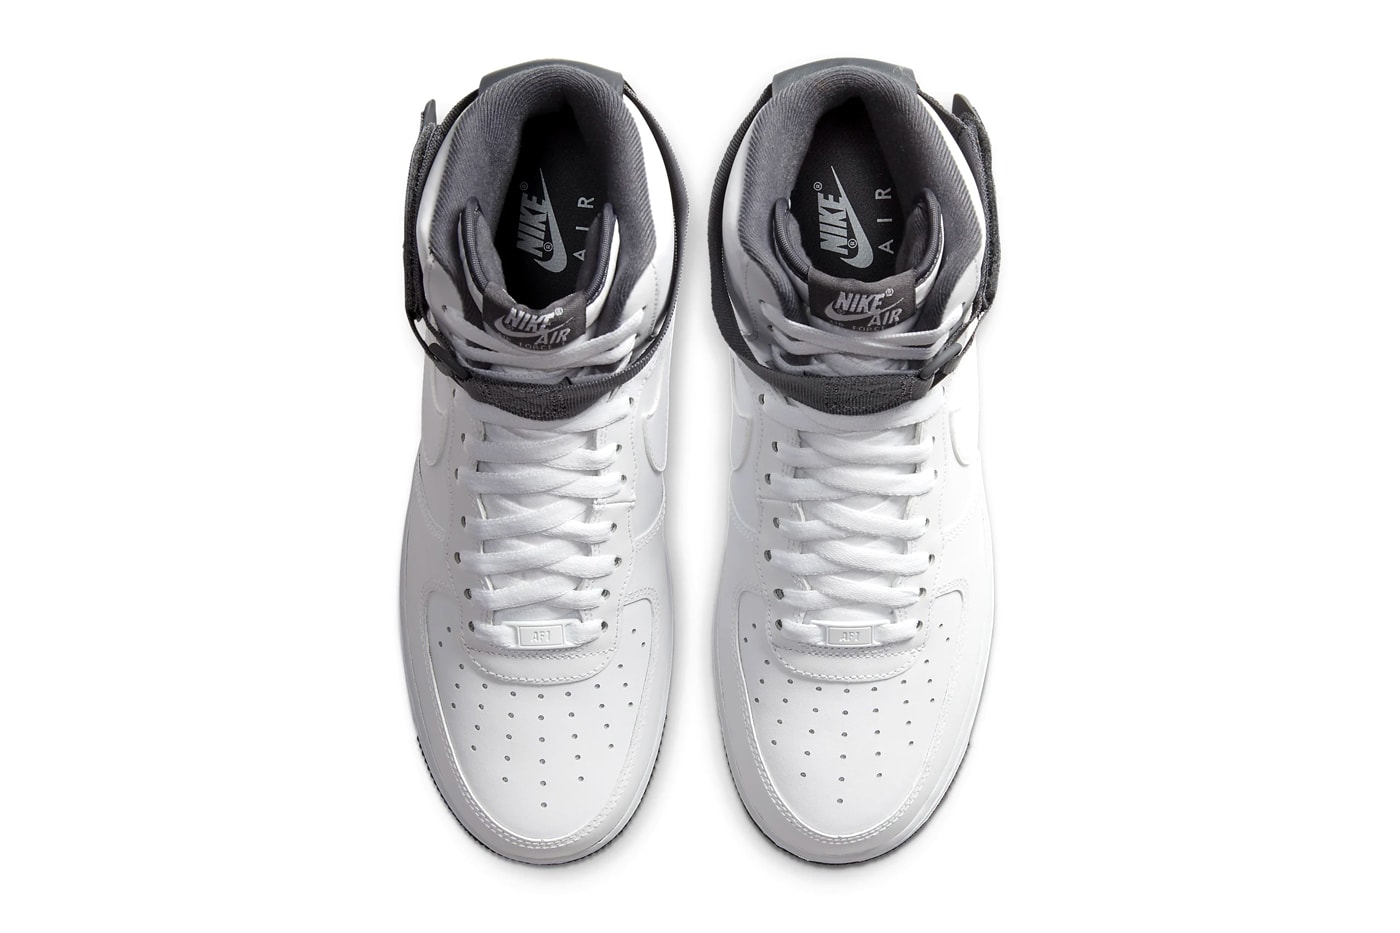 Nike Air Force 1 High 07 lv8 2 White Dark Gray CD0910 100 shoes sneakers menswear footwear kicks trainers runners basketball spring summer 2020 collection swoosh streetwear check